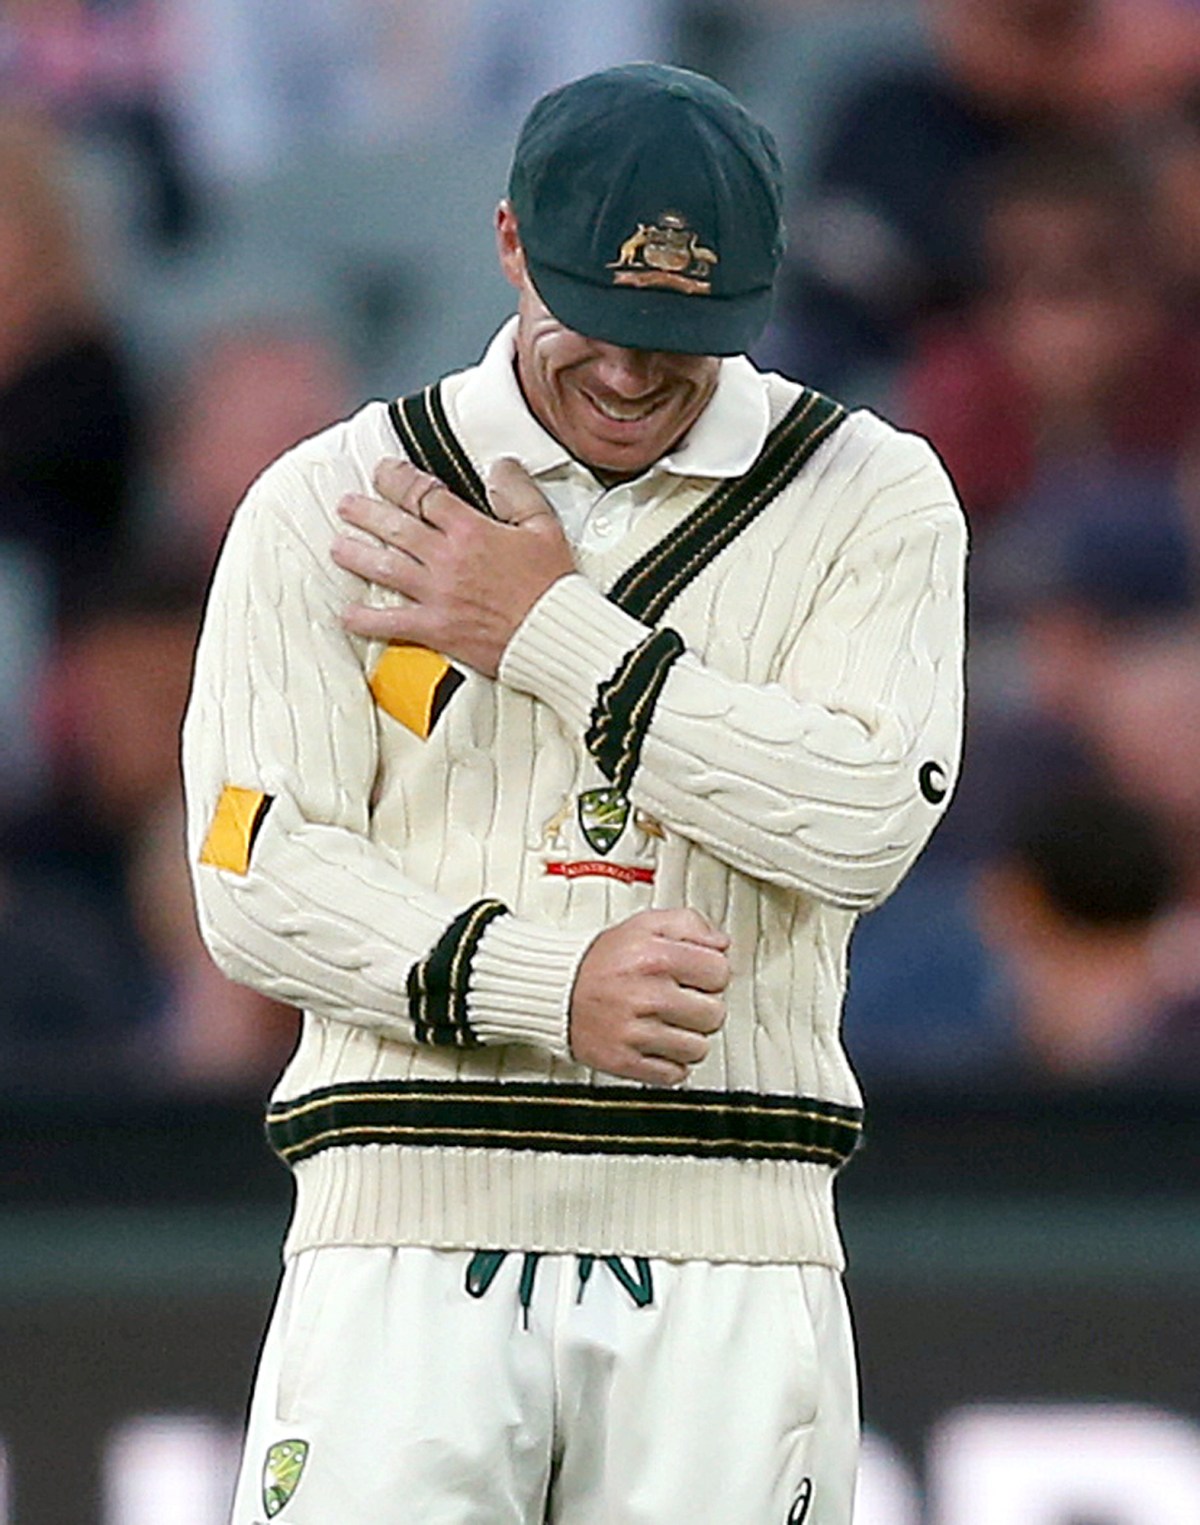 Australia's David Warner grabs at his arm while playing South Africa during their cricket test match in Adelaide, Australia, Thursday, Nov. 24, 2016. (AP Photo/Rick Rycroft)